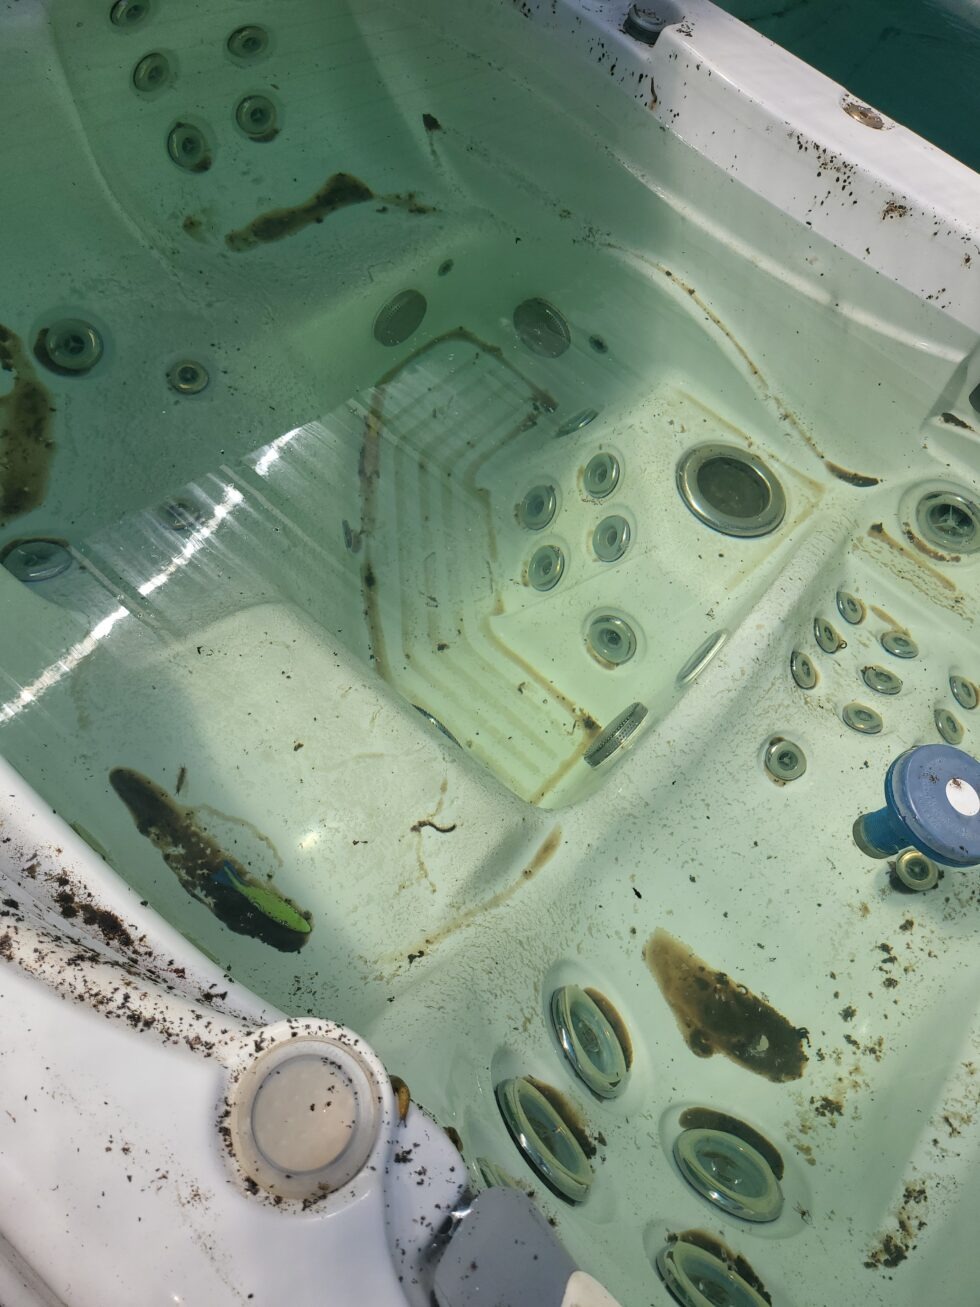 How Do I Get Rid Of An Unwanted Hot Tub?